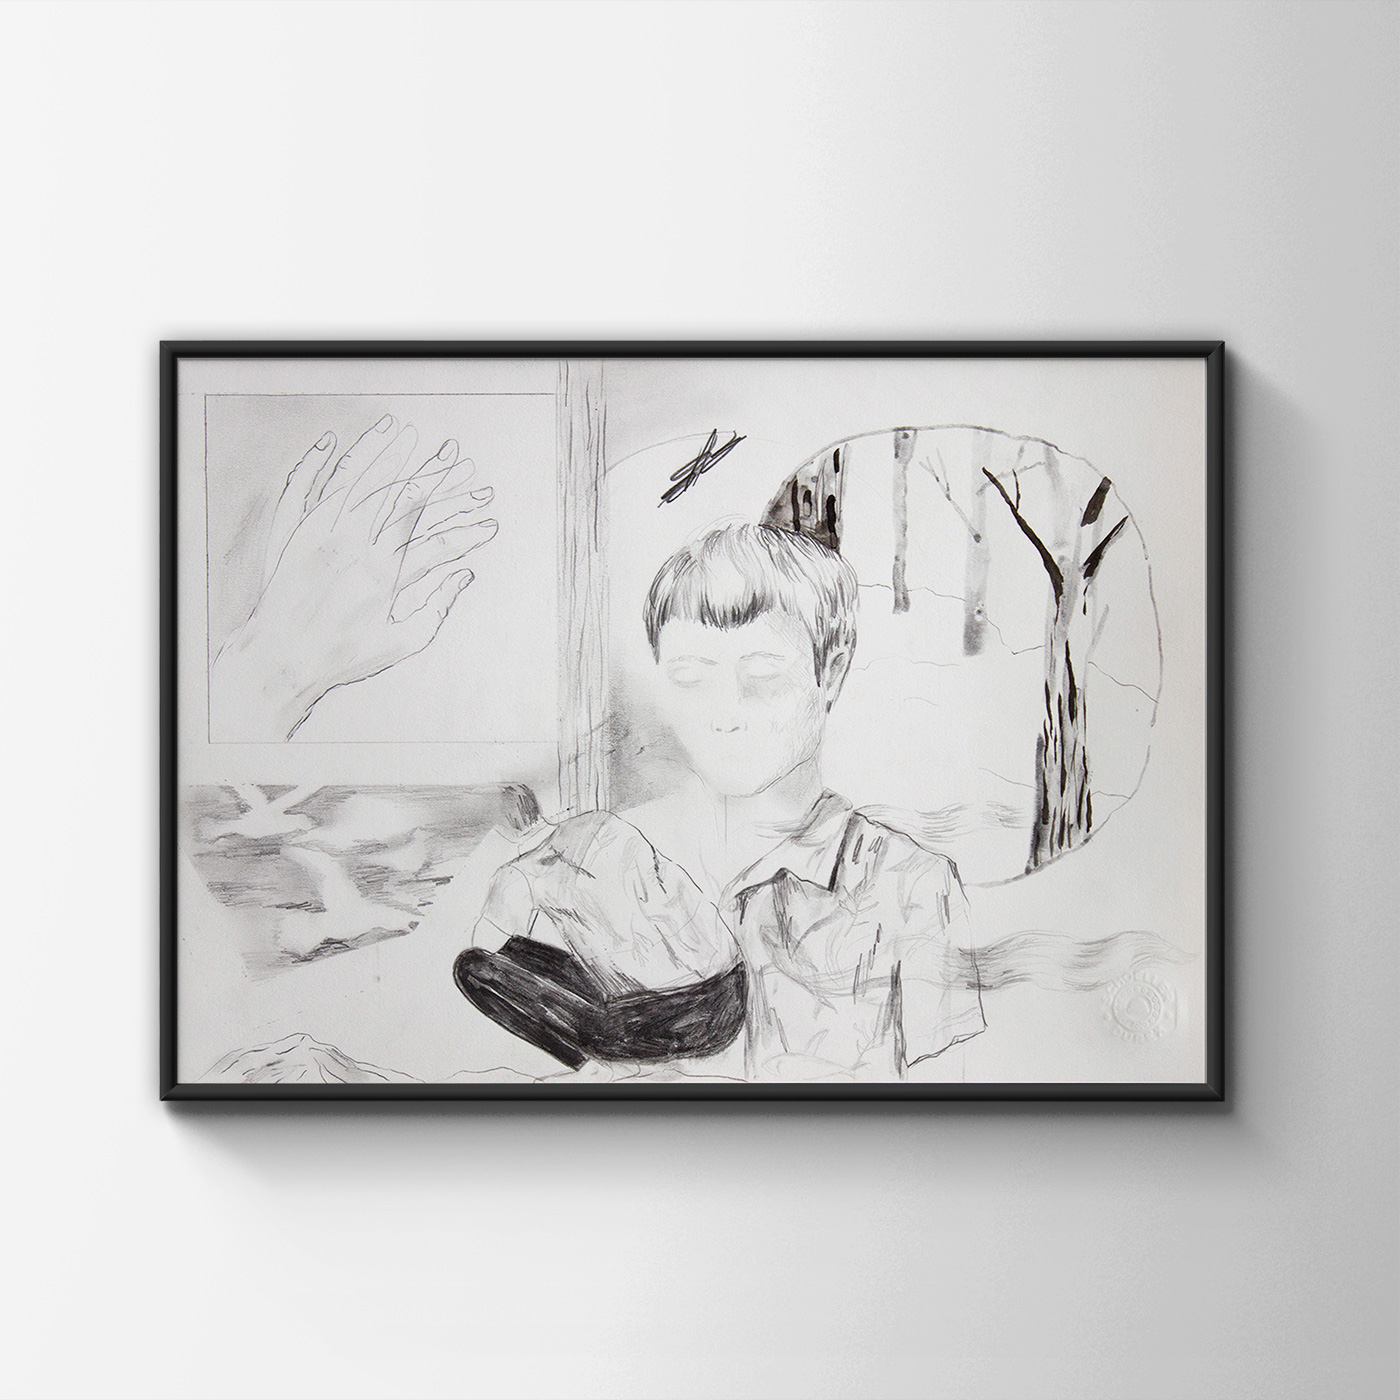 drawings, aesthetic, illustrative, monochrome, botany, nature, people, black, grey, white, charcoal, paper, pencils, autumn, black-and-white, decorative, faces, interior, interior-design, trees, Buy original high quality art. Paintings, drawings, limited edition prints & posters by talented artists.